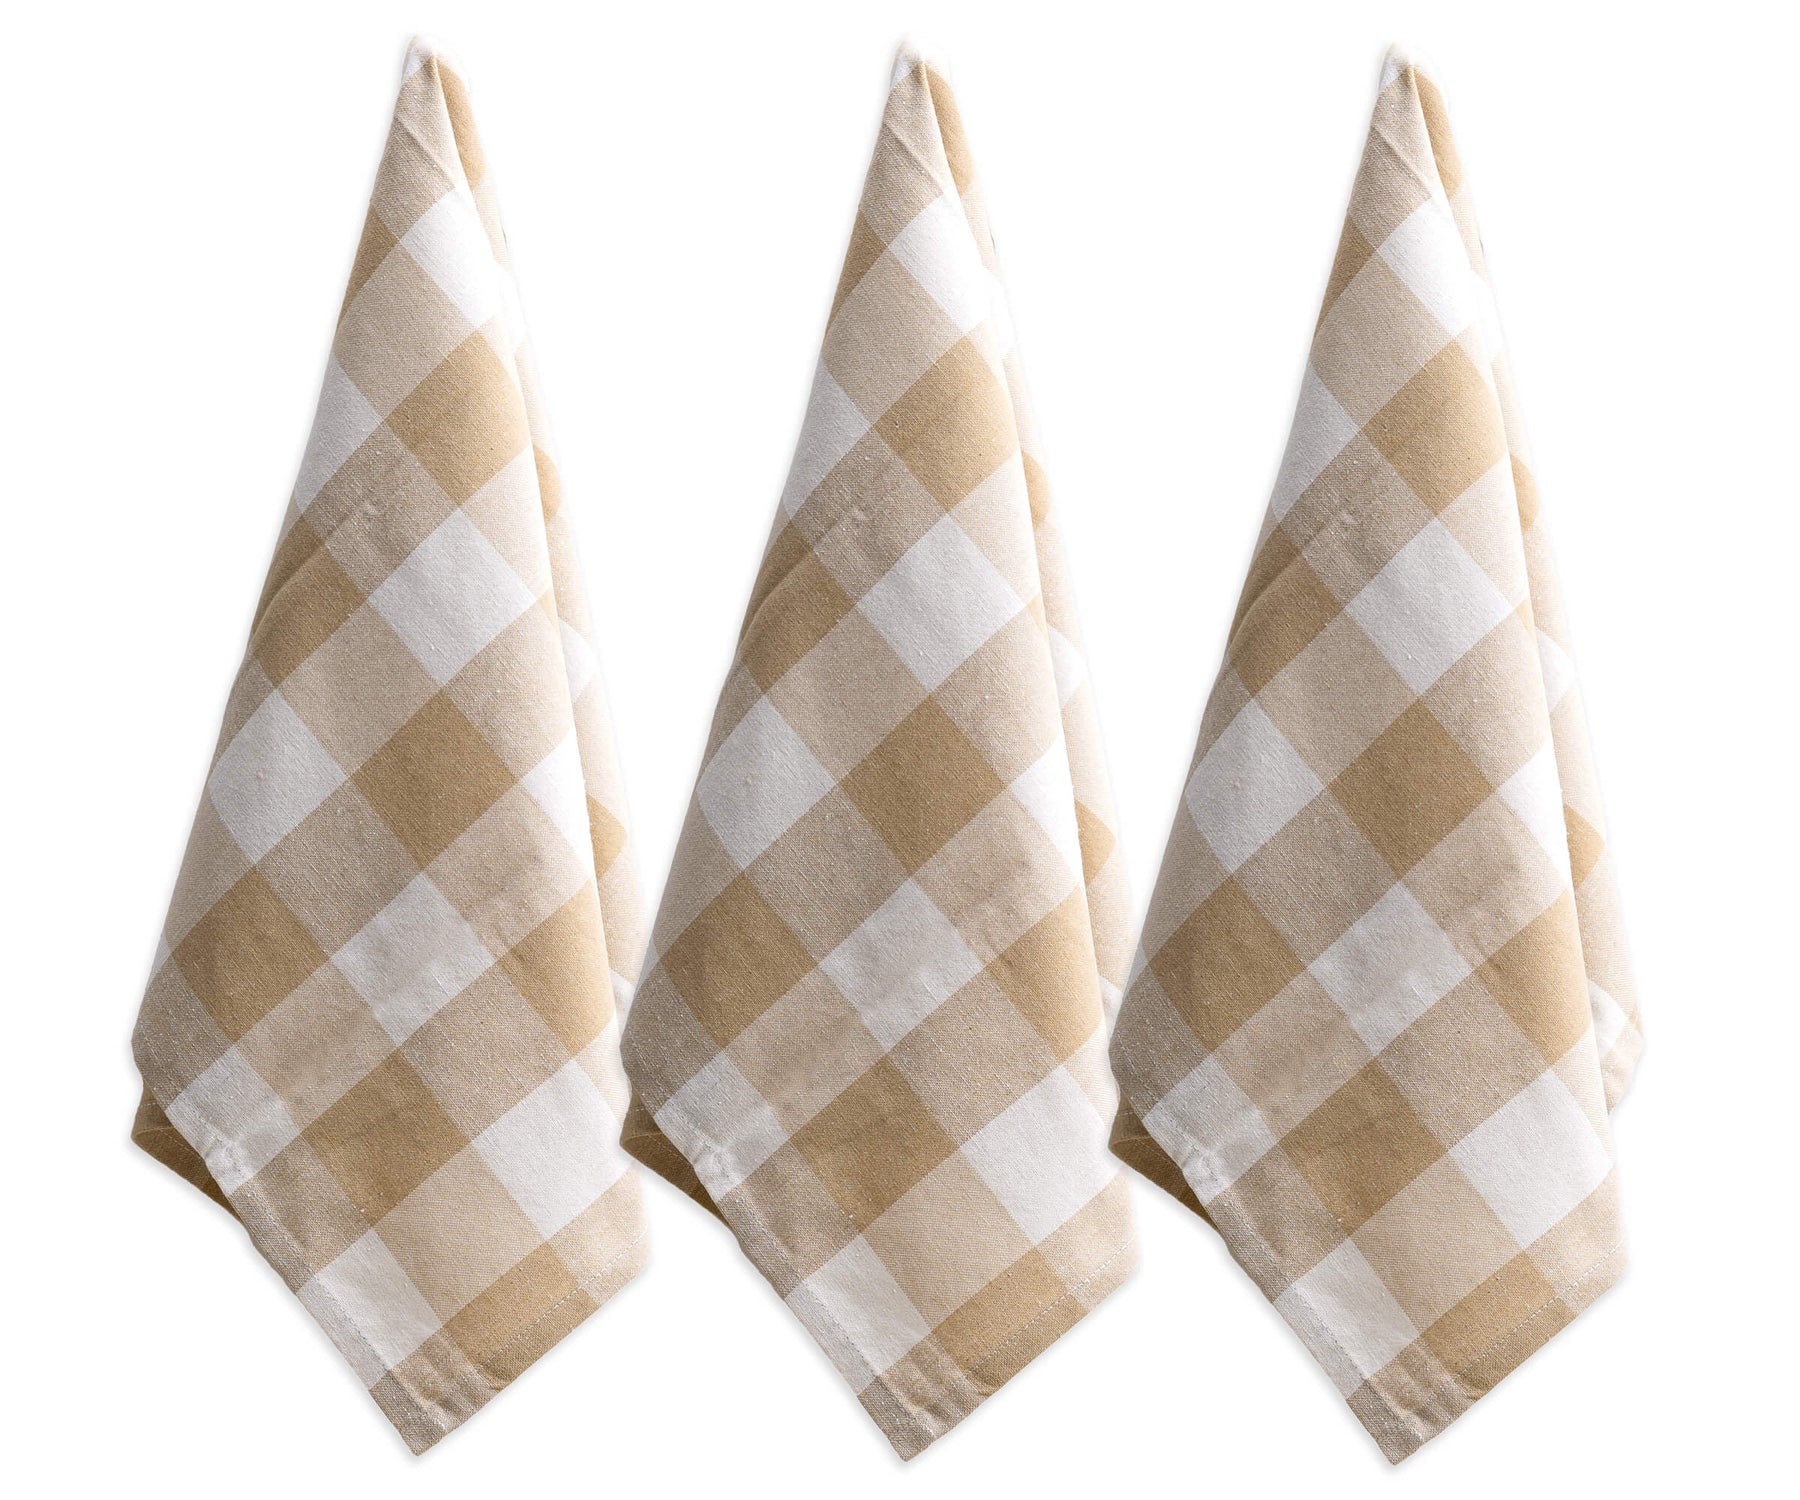 Kitchen dish towels are a must-have for any kitchen. They are perfect for drying dishes, wiping counters, and cleaning up spills.